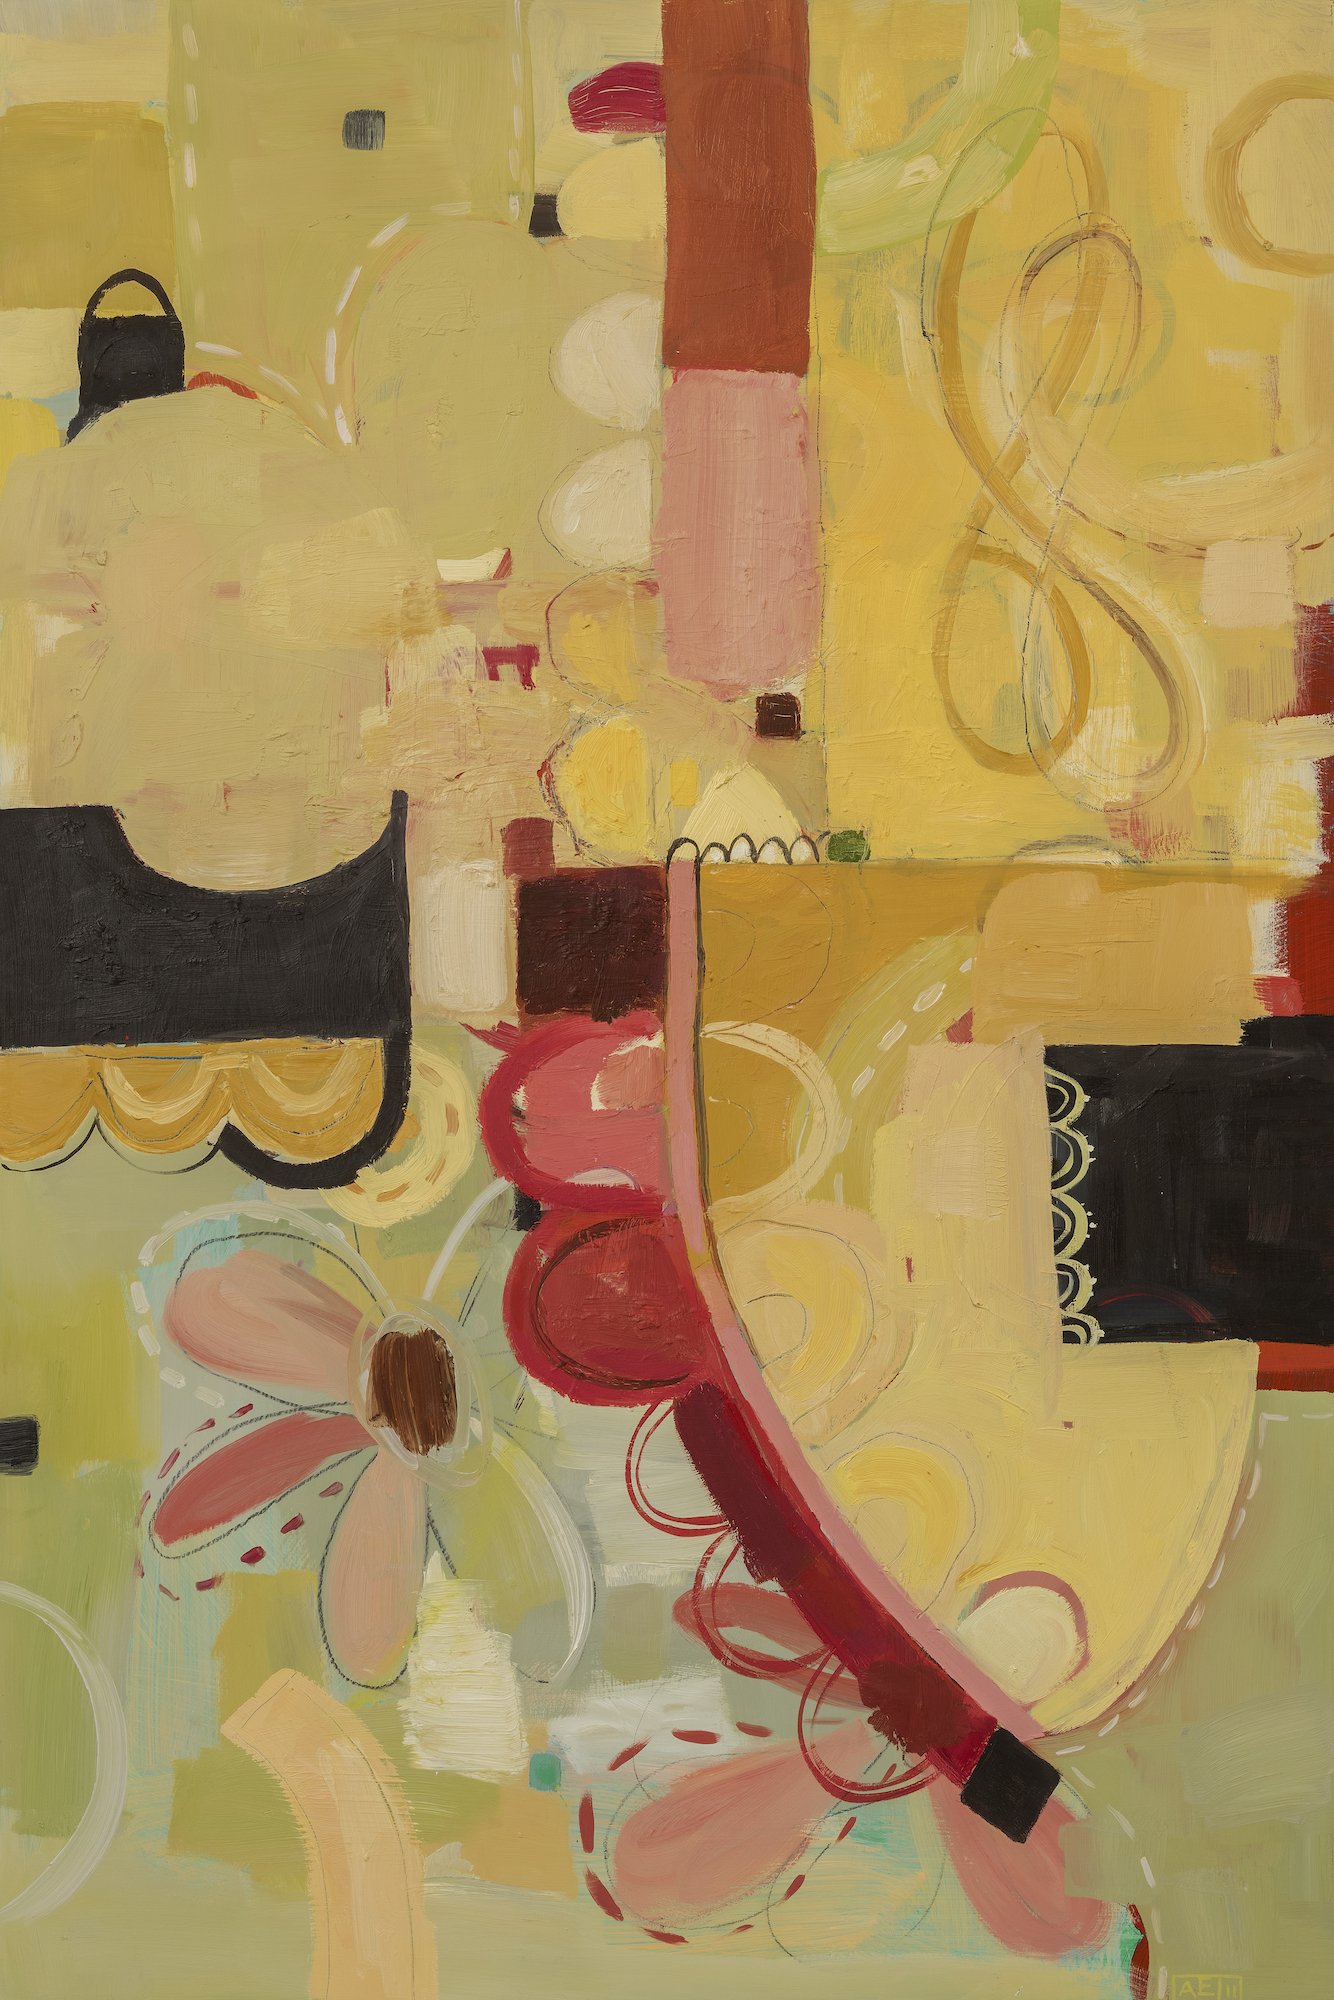 Abstract paintings with organic forms and planes of yellows, greens, and reds.